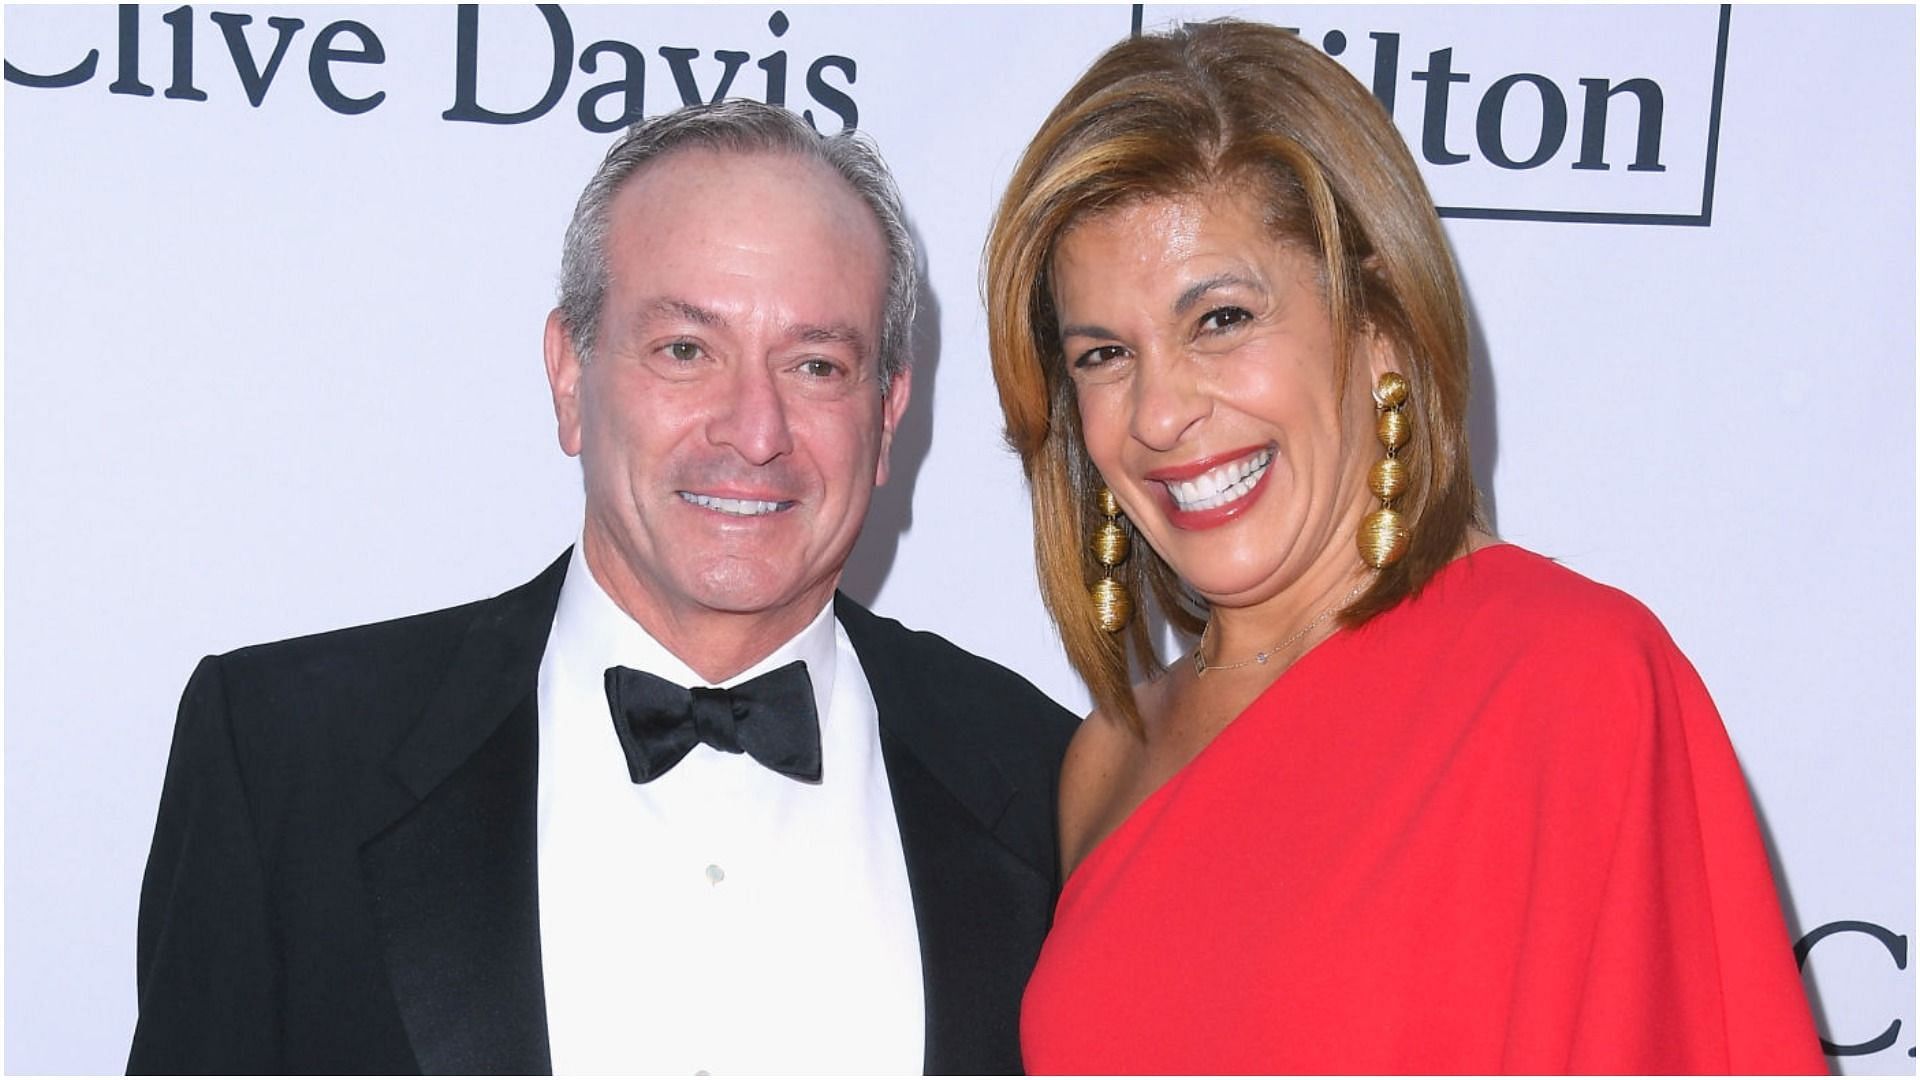 Hoda Kotb and Joel Schiffman have separated after being together for 8 years (Image via Steve Granitz/Getty Images)